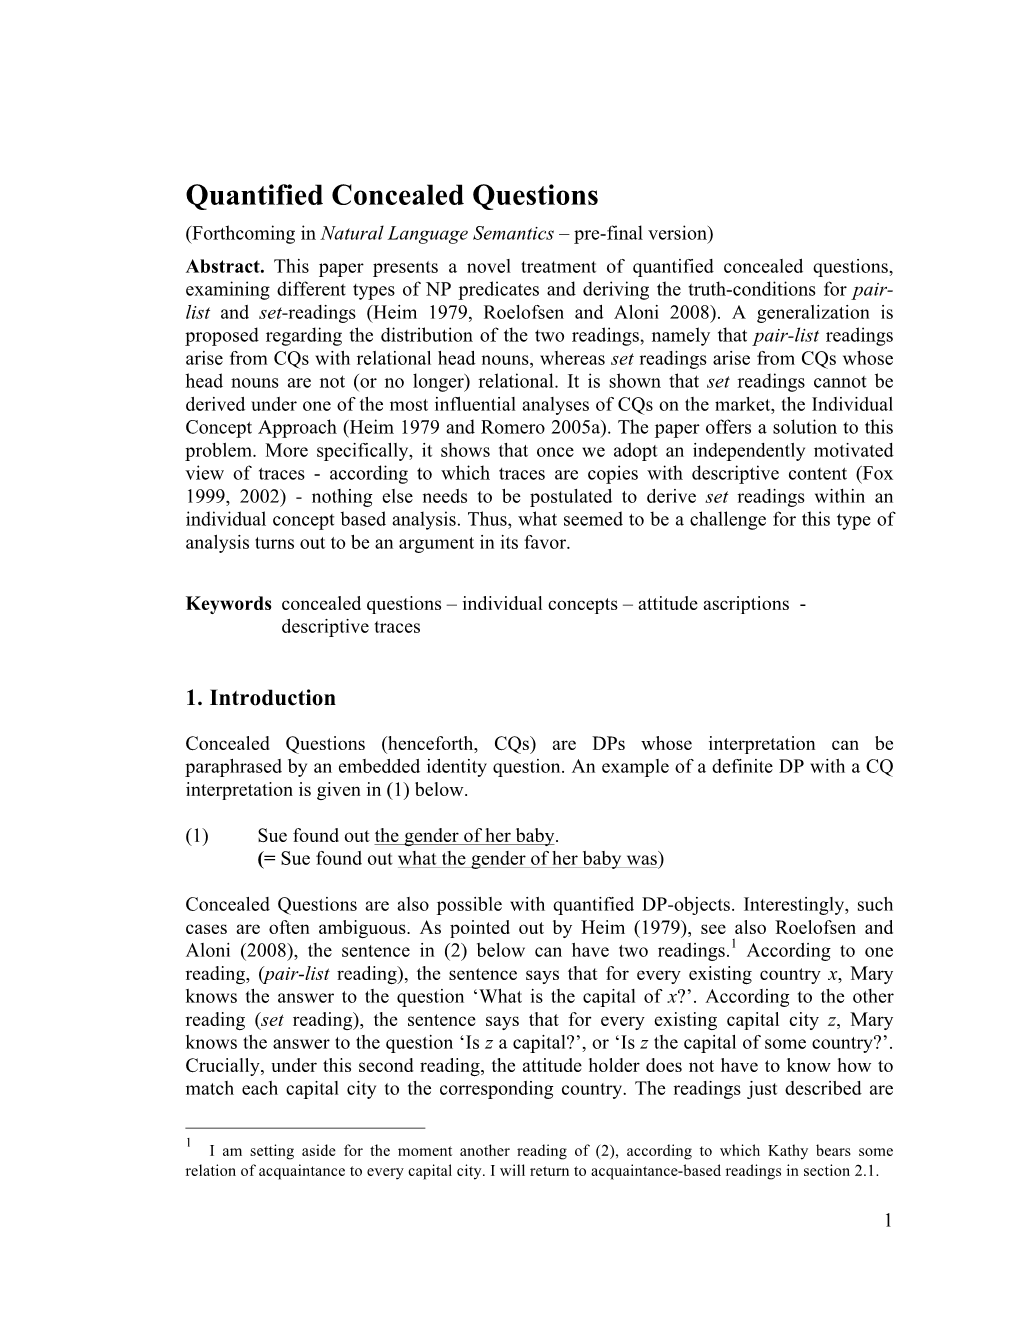 Quantified Concealed Questions (Forthcoming in Natural Language Semantics – Pre-Final Version) Abstract